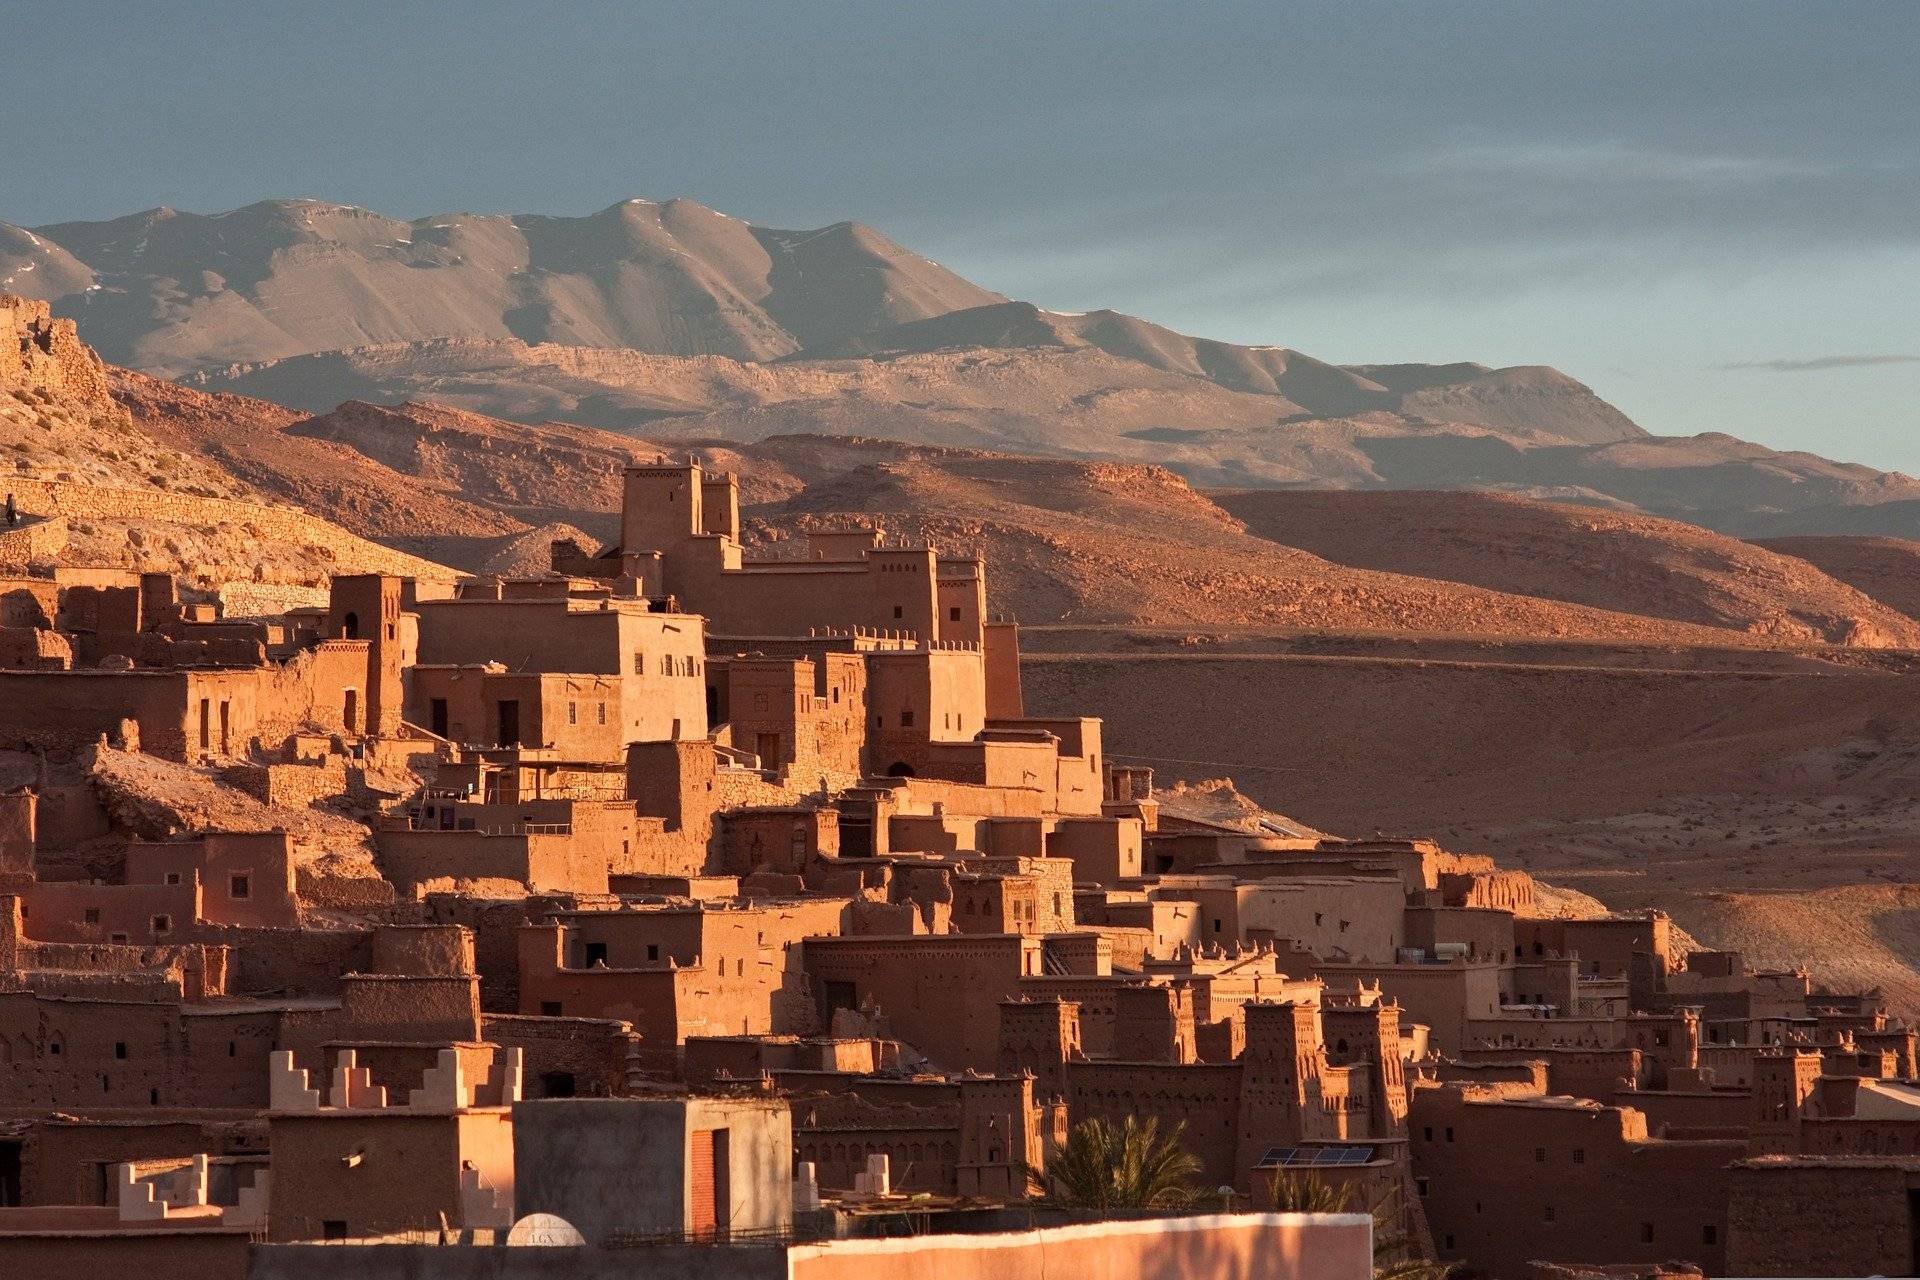 morocco g7c31b851f 1920 - Morocco Private Tours | Morocco Guided Tour | Morocco Tours